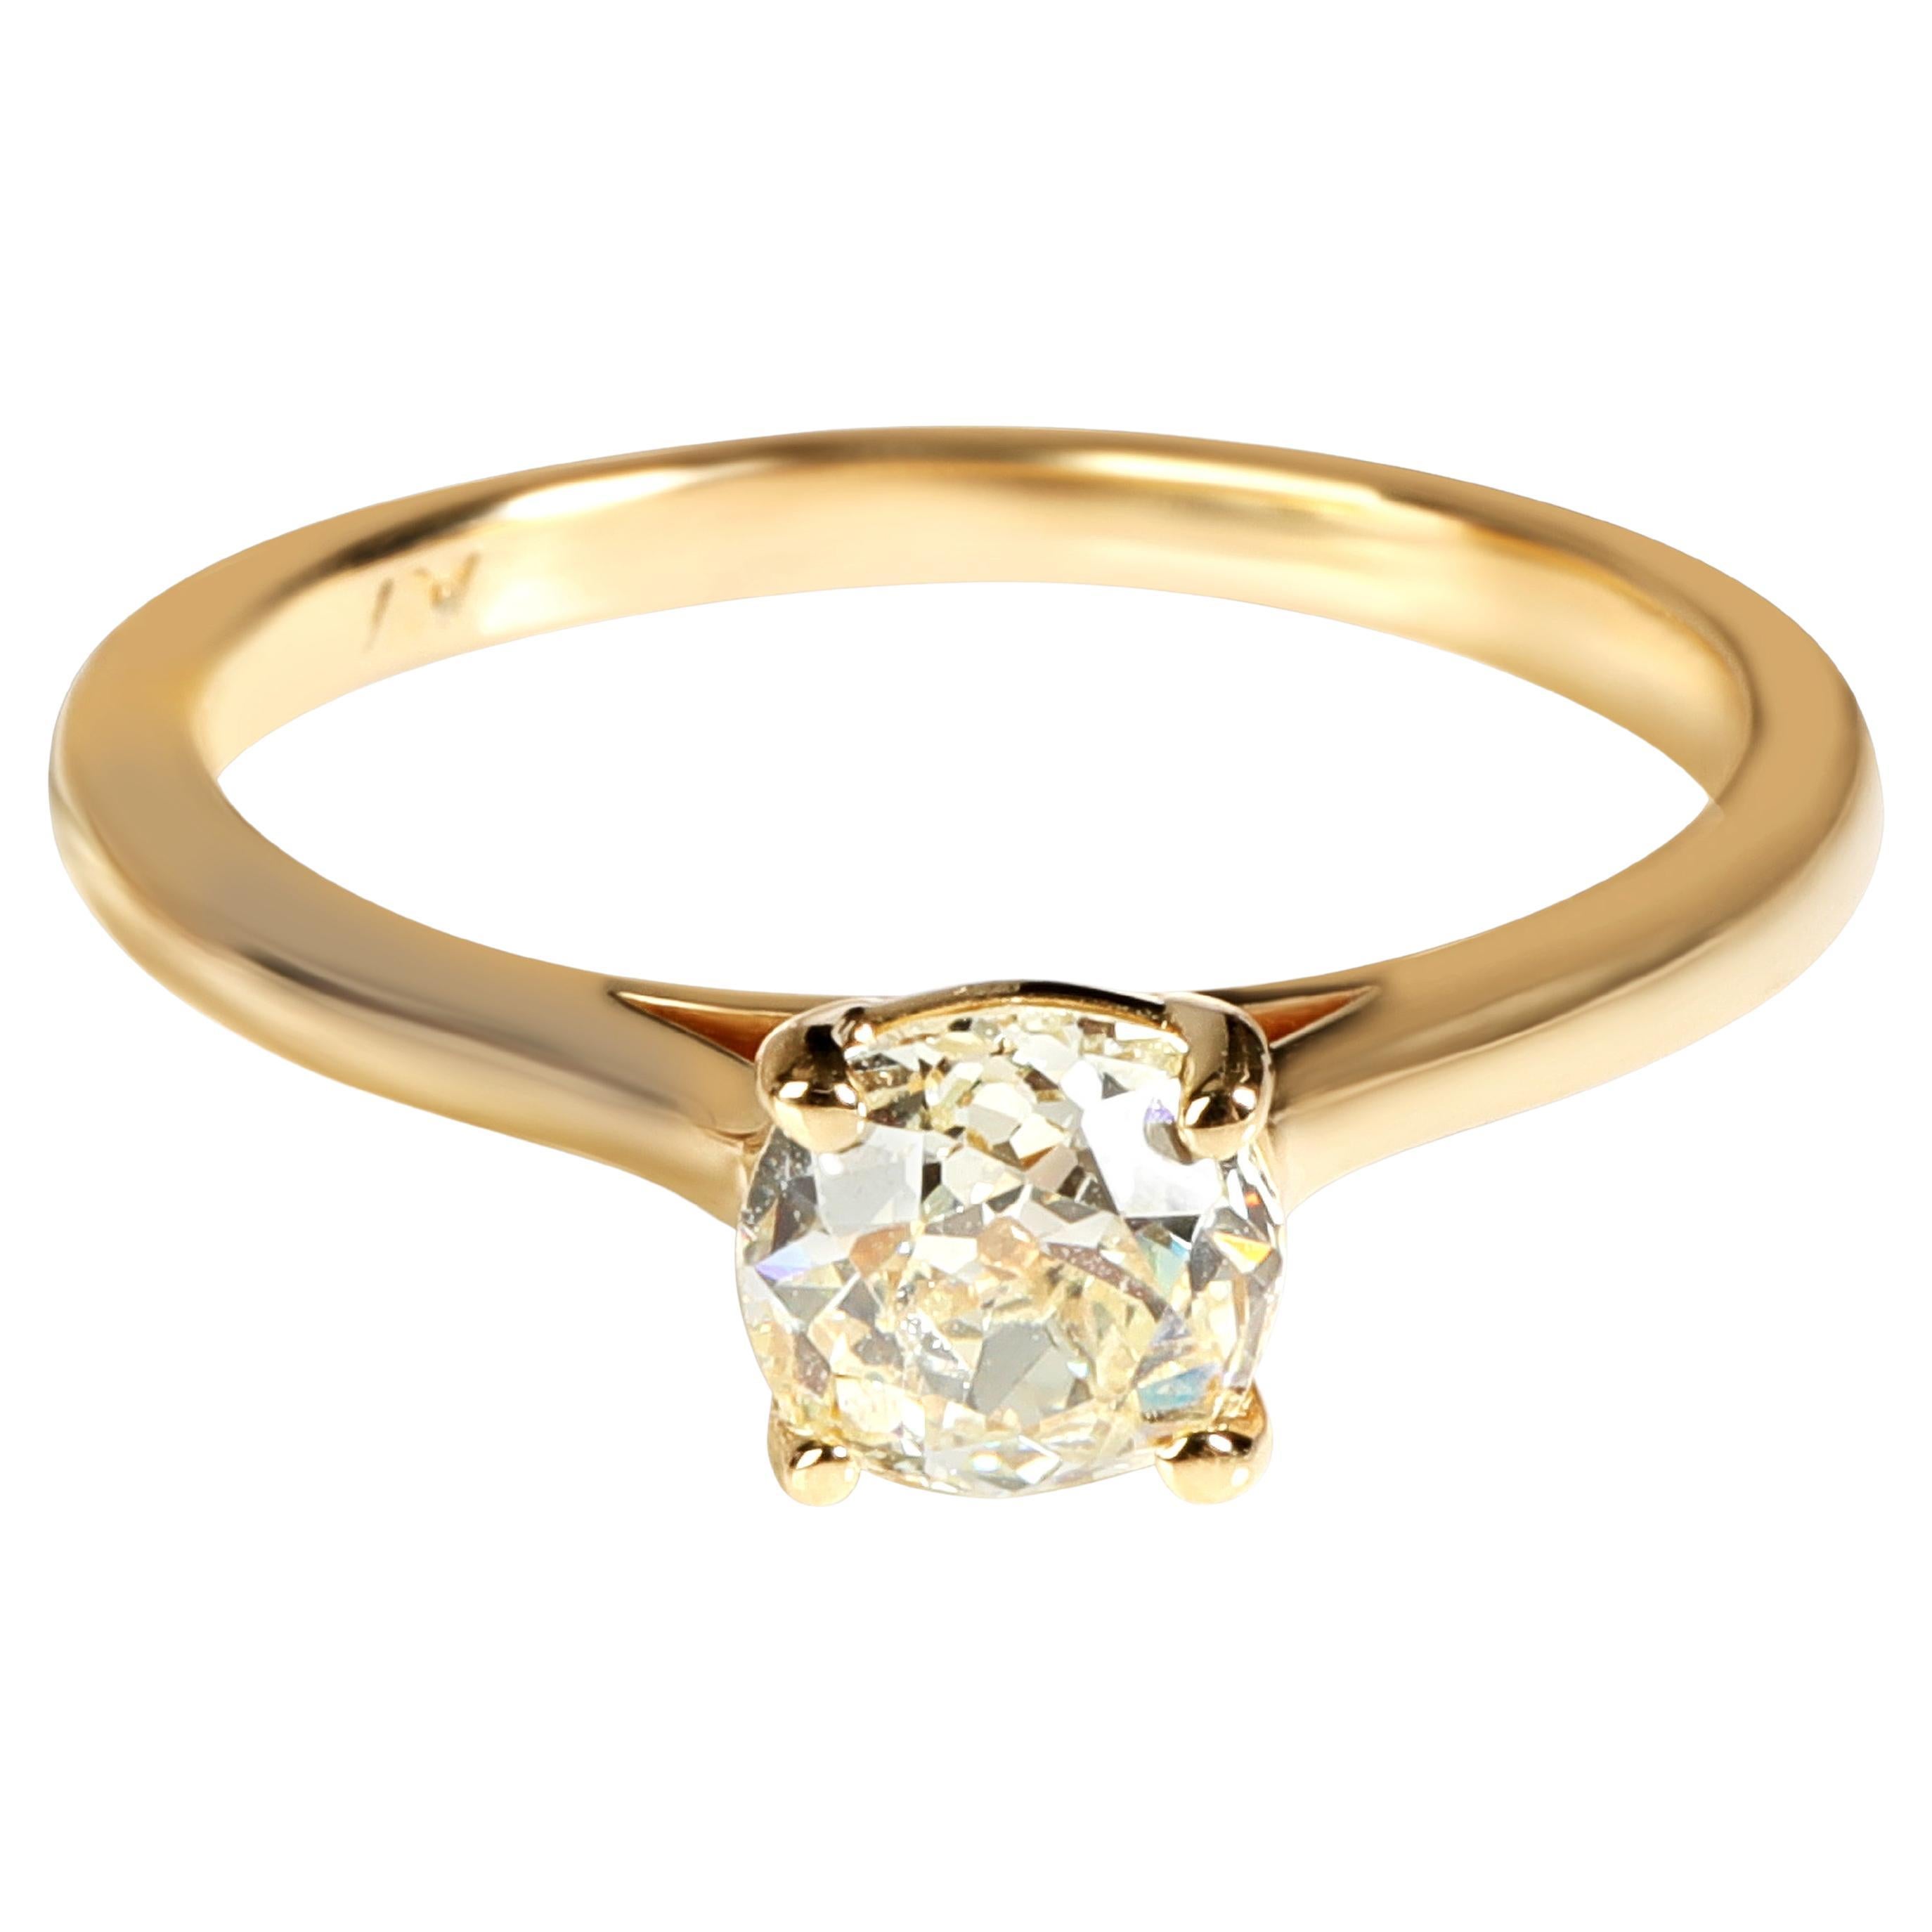 GIA Certified Old Mine Cut Diamond Engagement Ring in 14K Yellow Gold 0.79 CTW